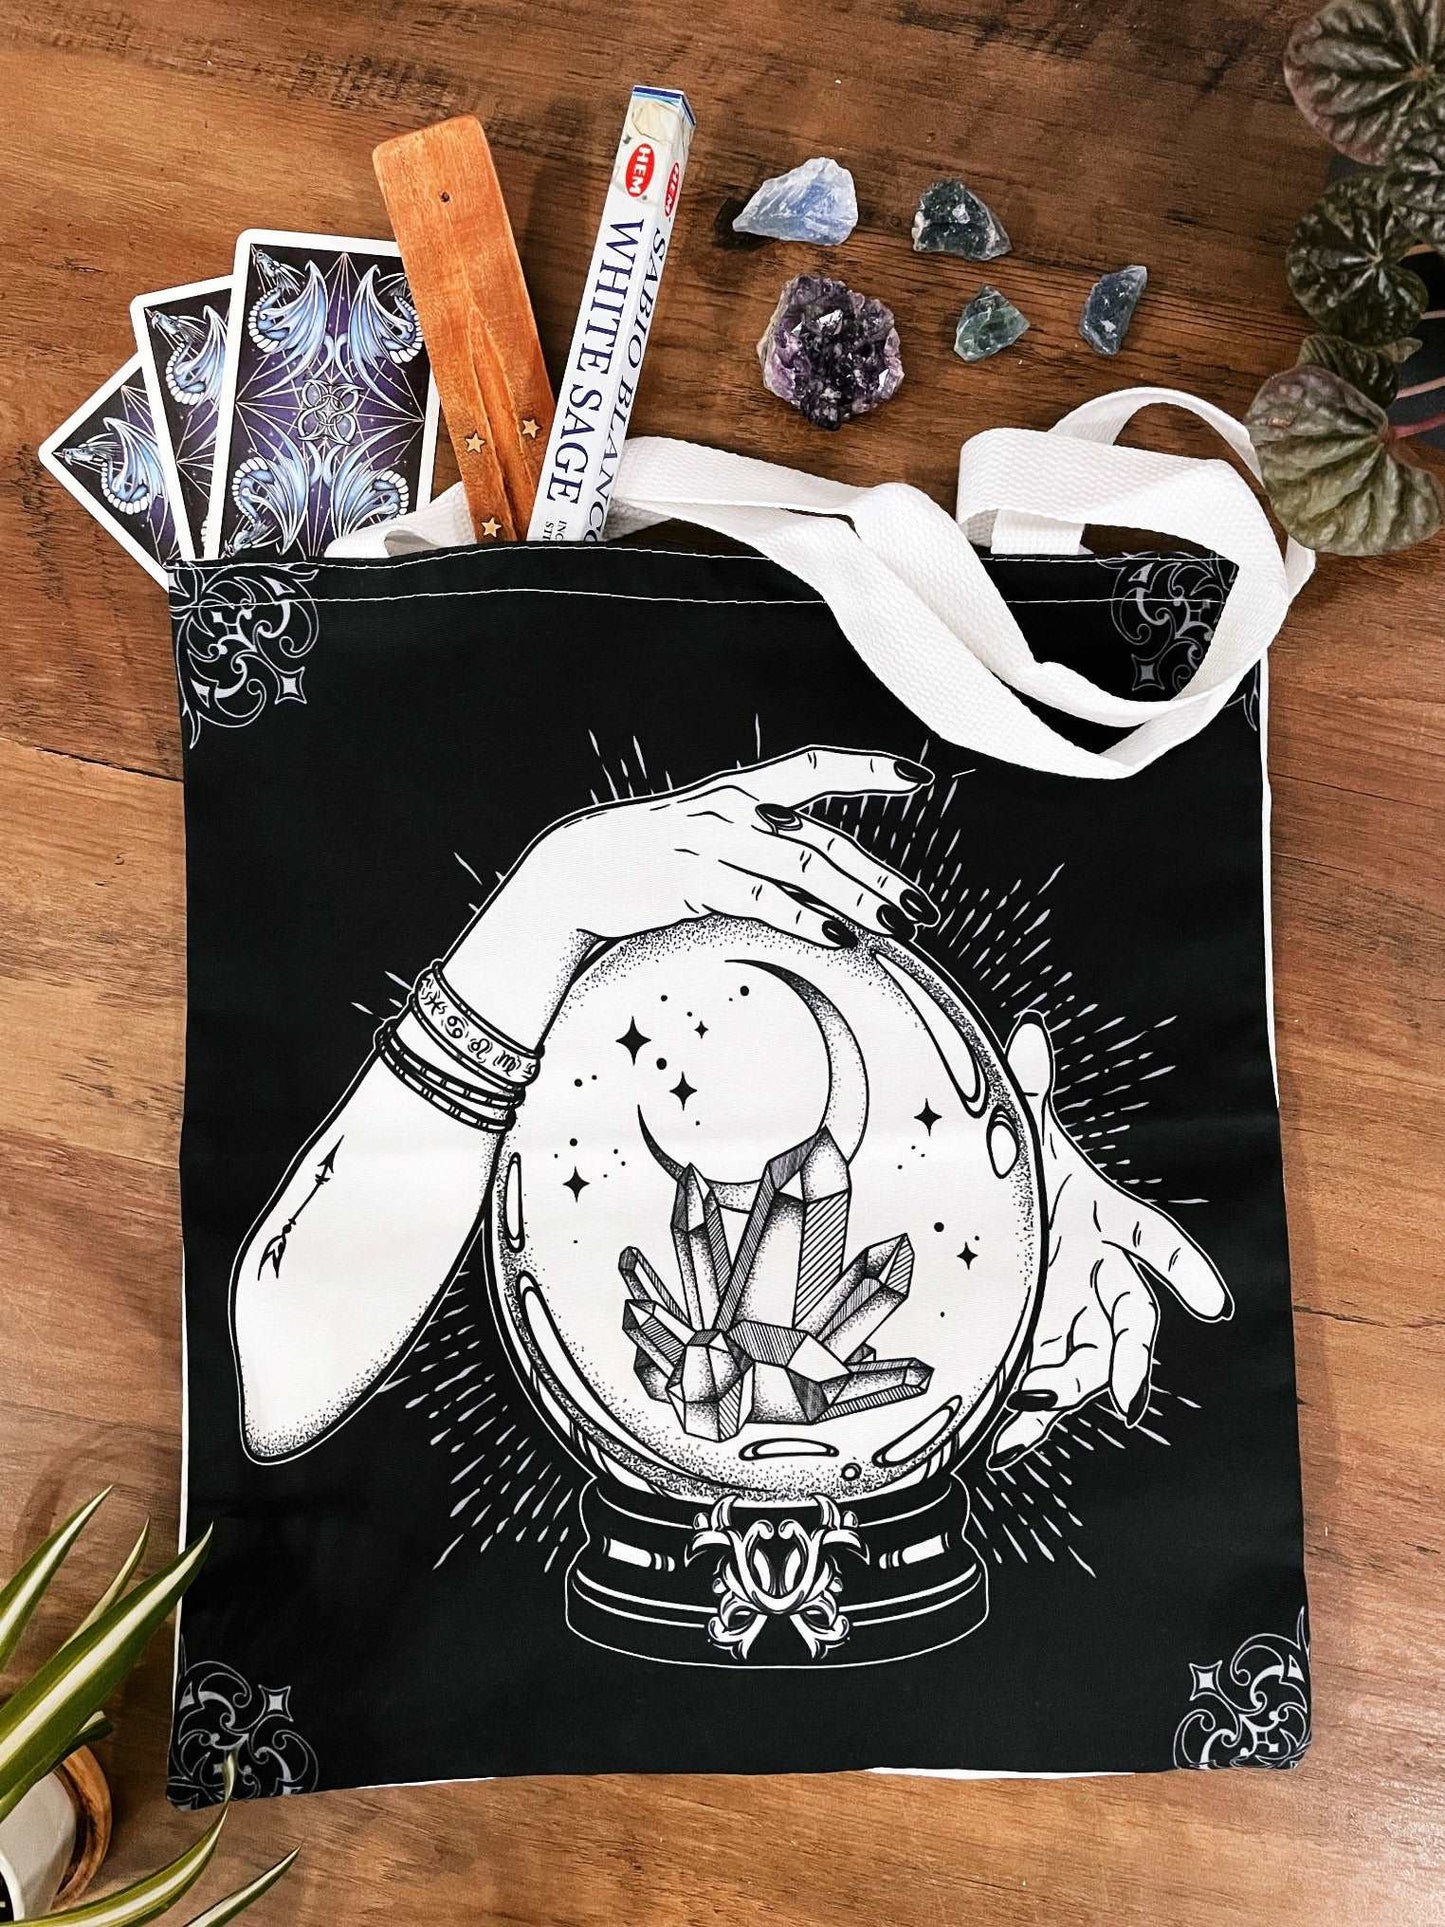 Pictured is a large canvas tote bag featuring an image of two hands around a crystal ball with crystals inside.